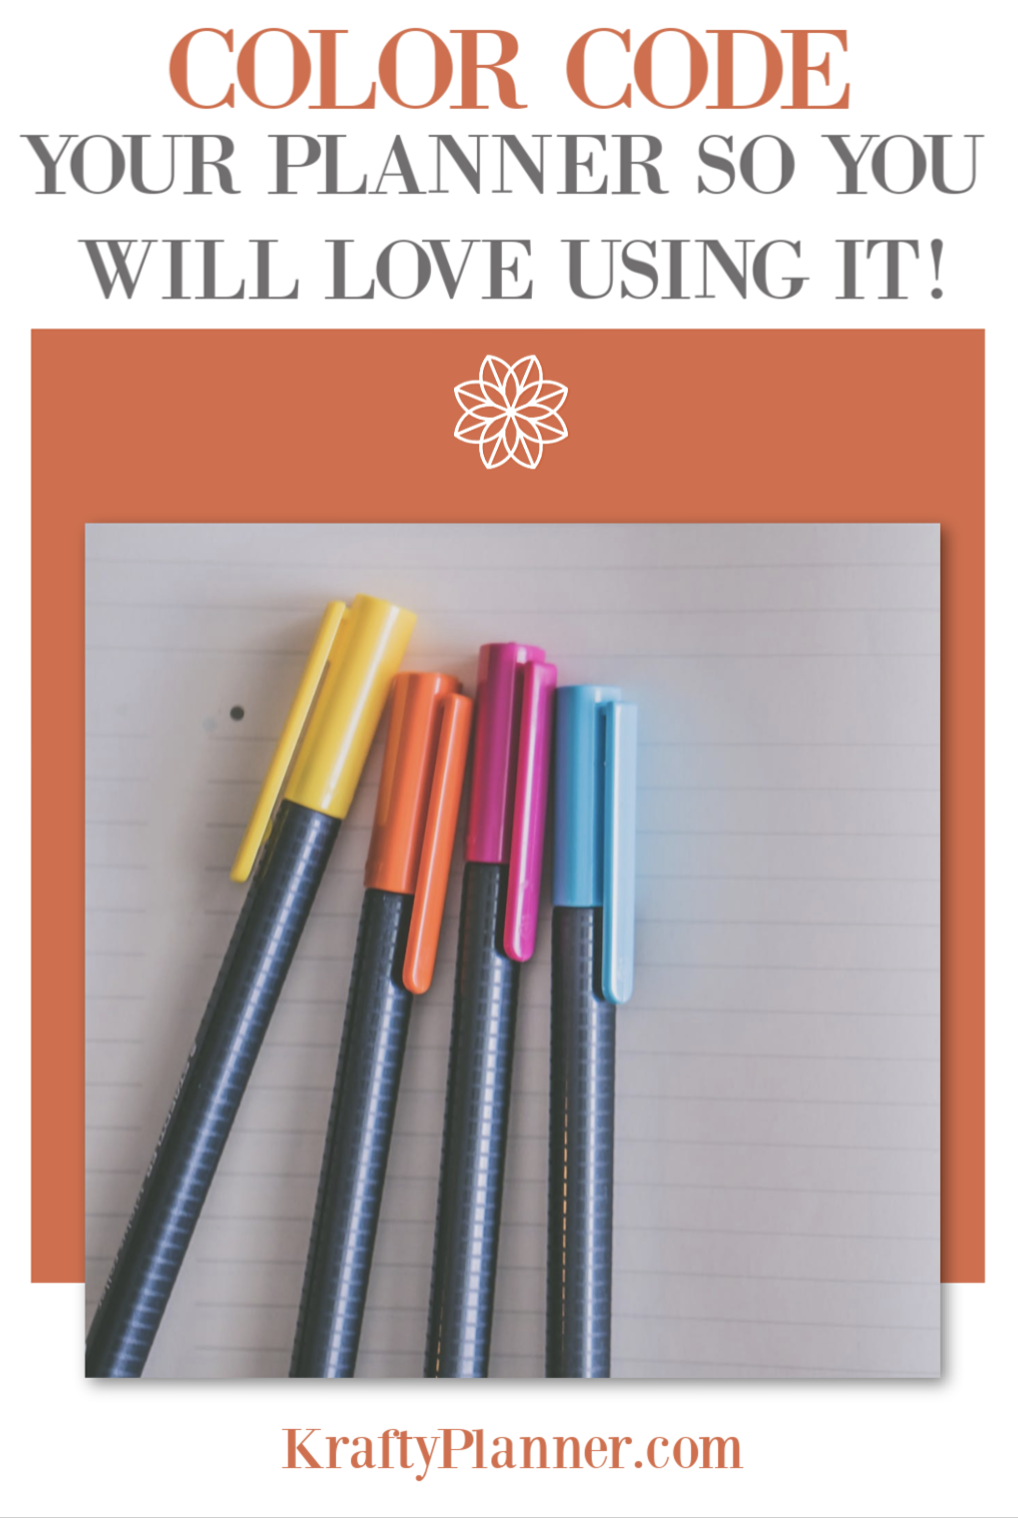 Color Coding Your Planner So You’ll Love Using It! PIN 2.png